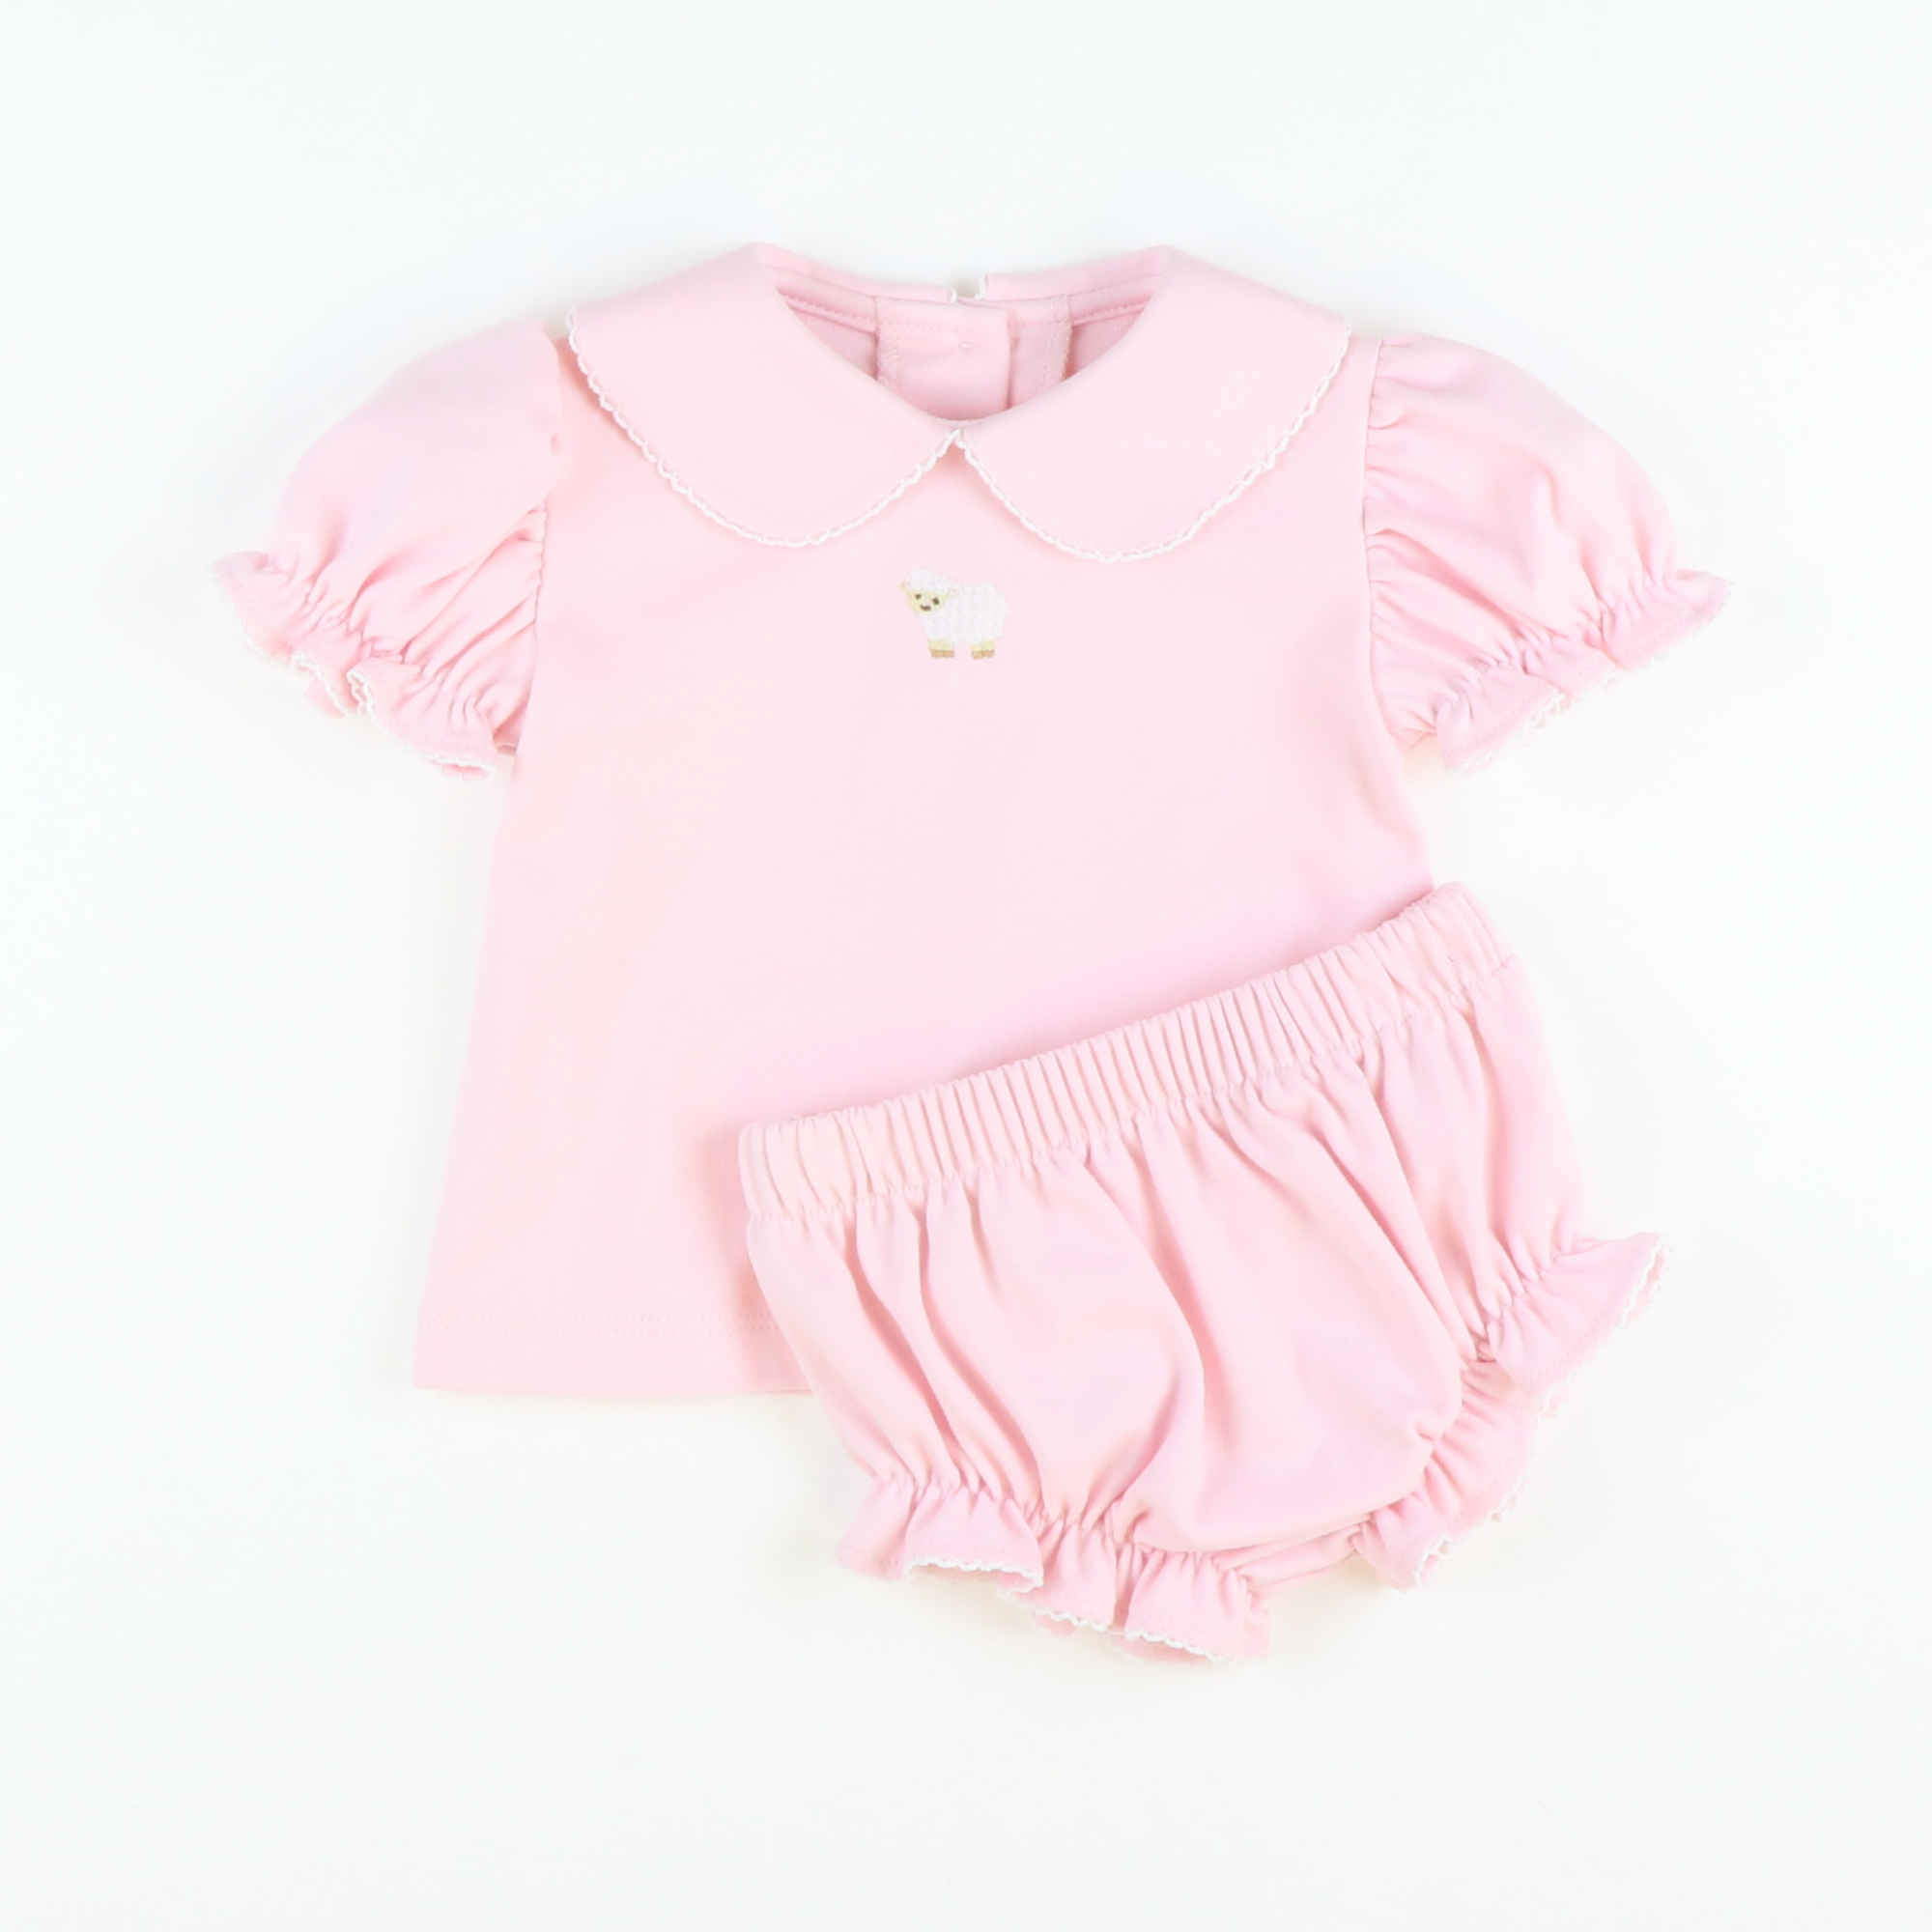 Embroidered Lamb Knit Set - Light Pink - Stellybelly